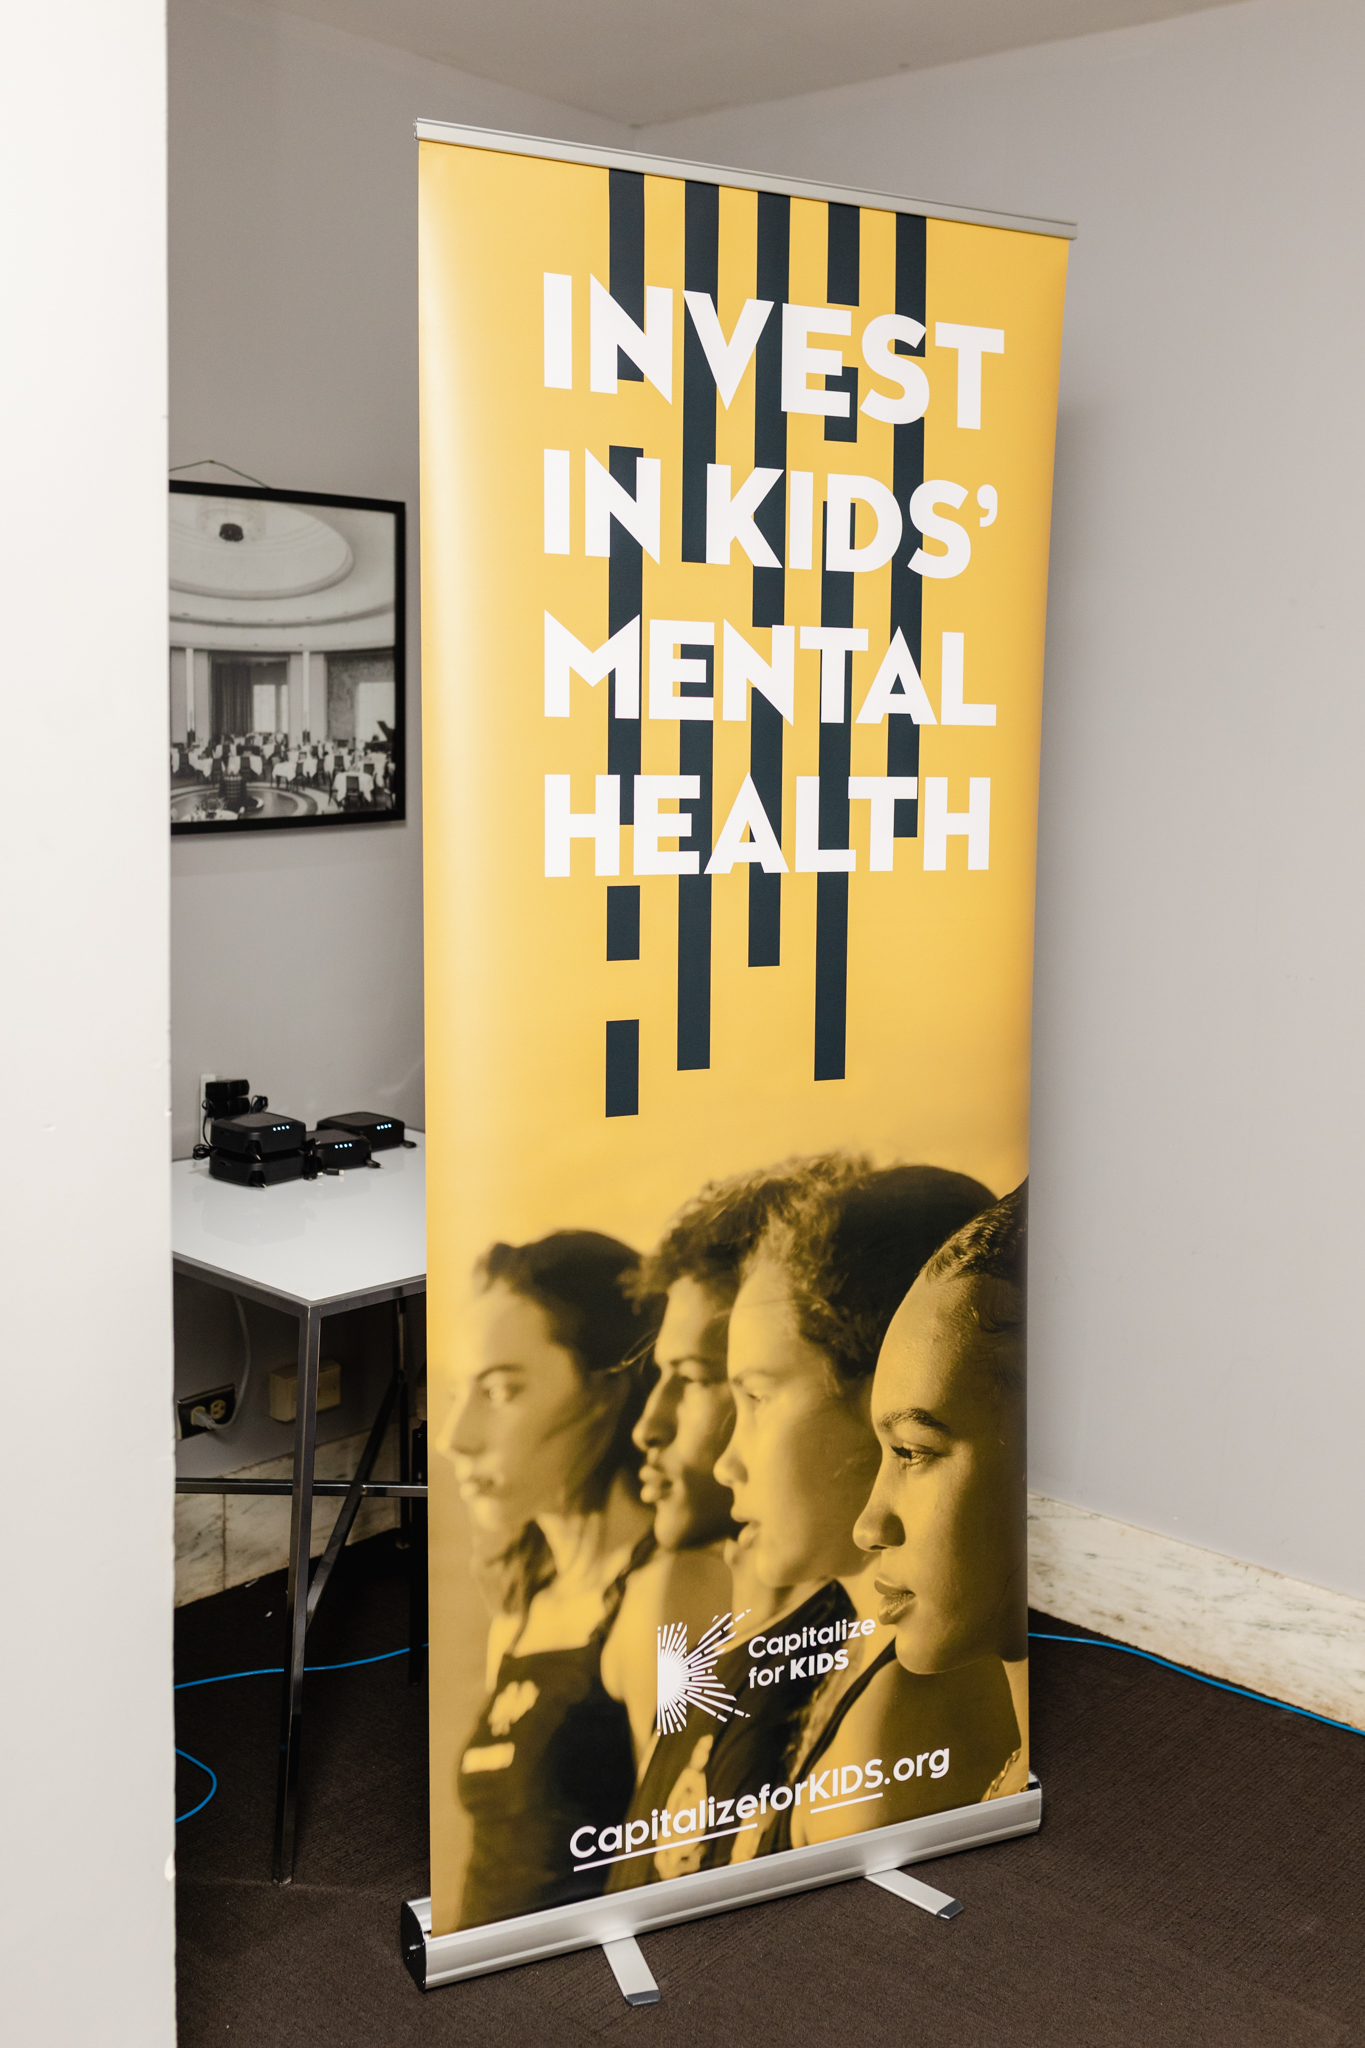 Invest in kids mental health conference roll up banner.